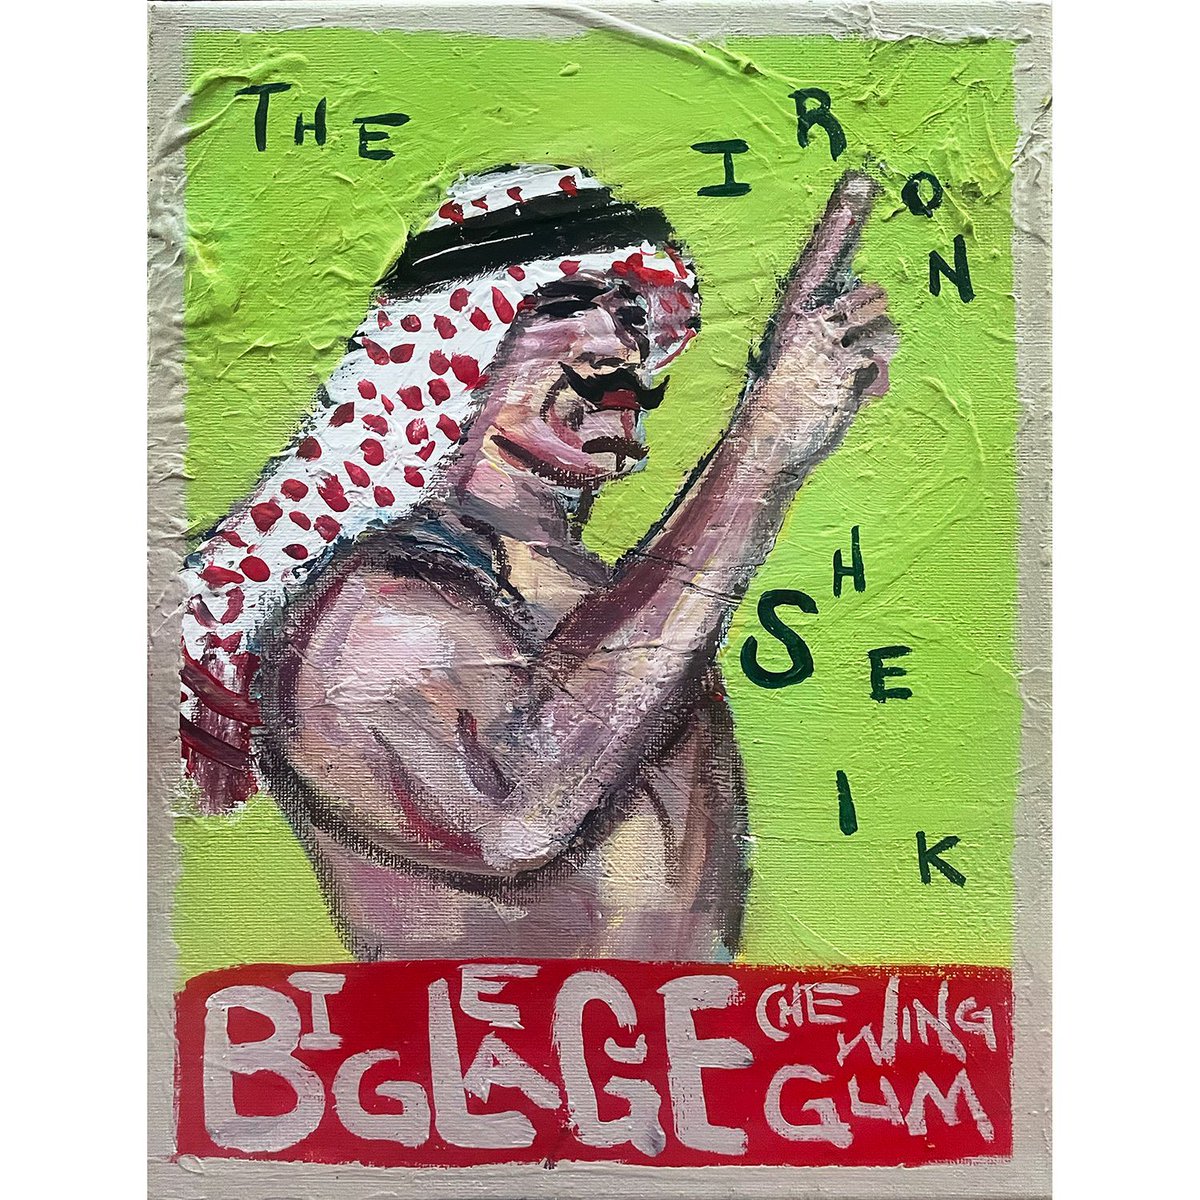 “In the gym, I am the man. I am the strongest, I am the best. Even the weights are scared of me.” -Iron Sheik #ironsheik